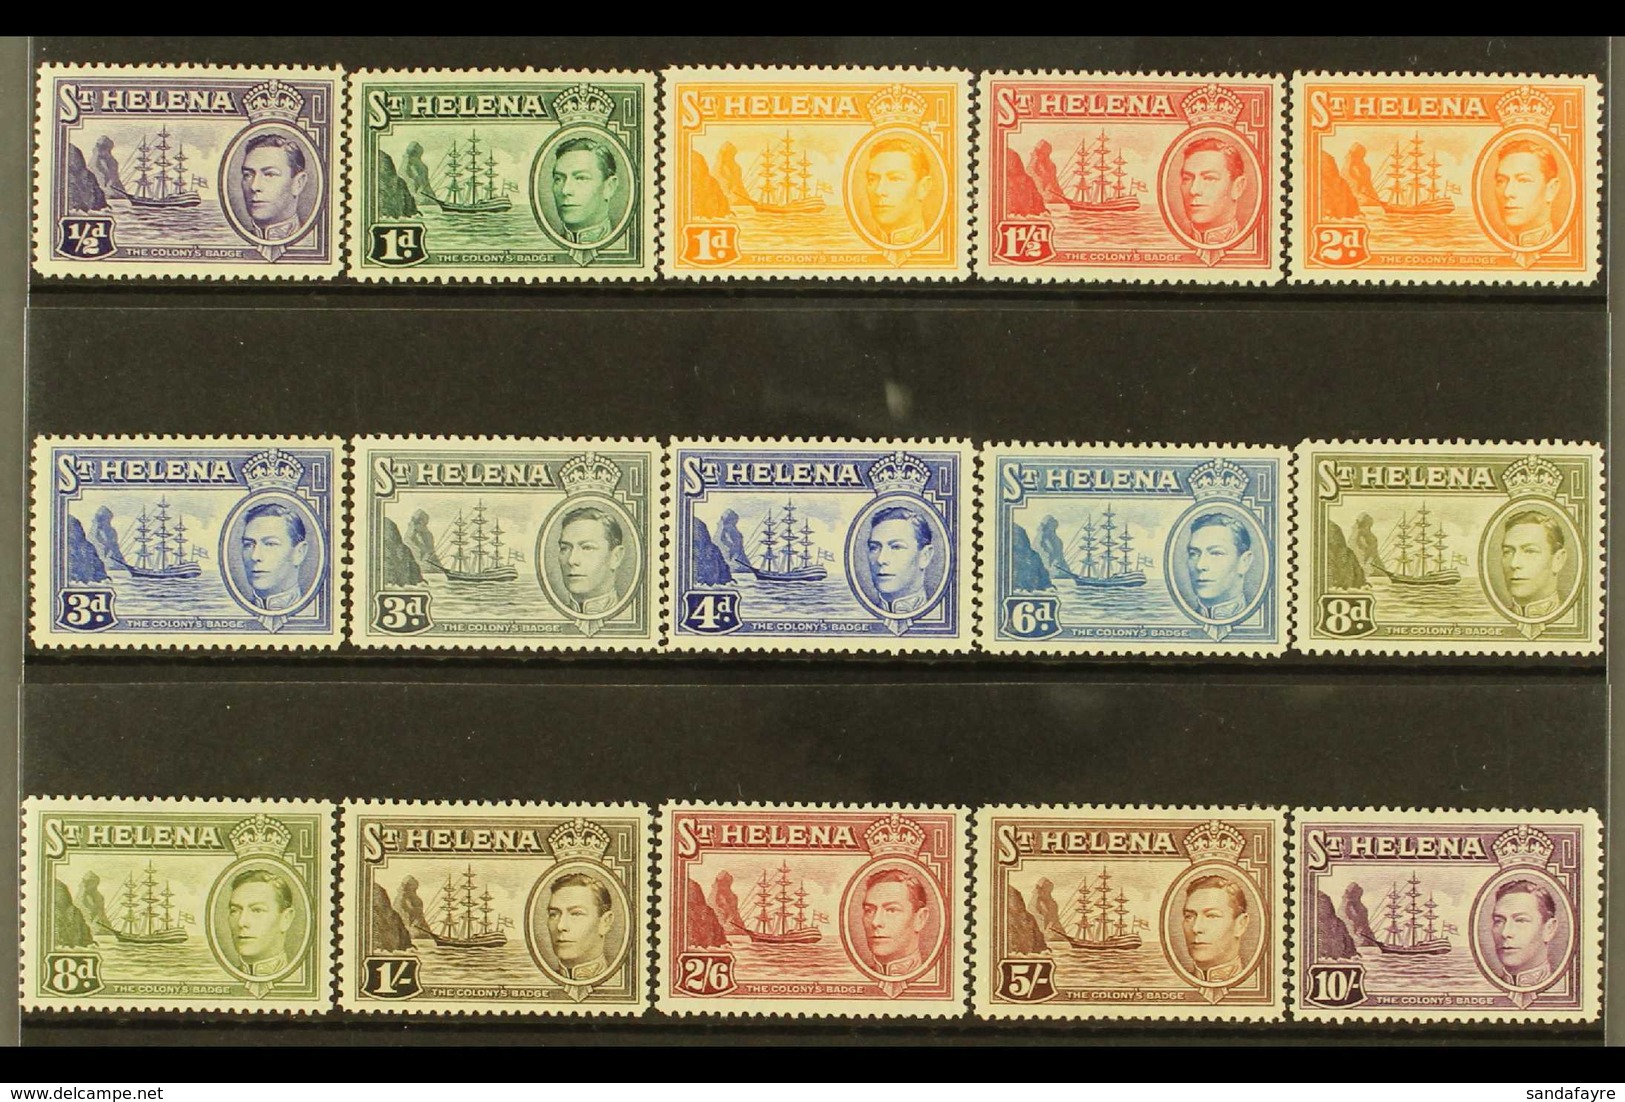 1938-44 Badge - Ship Complete Set Inc Both 8d Shades, SG 131/40 & 136b, Very Fine Mint, Fresh. (15 Stamps) For More Imag - St. Helena